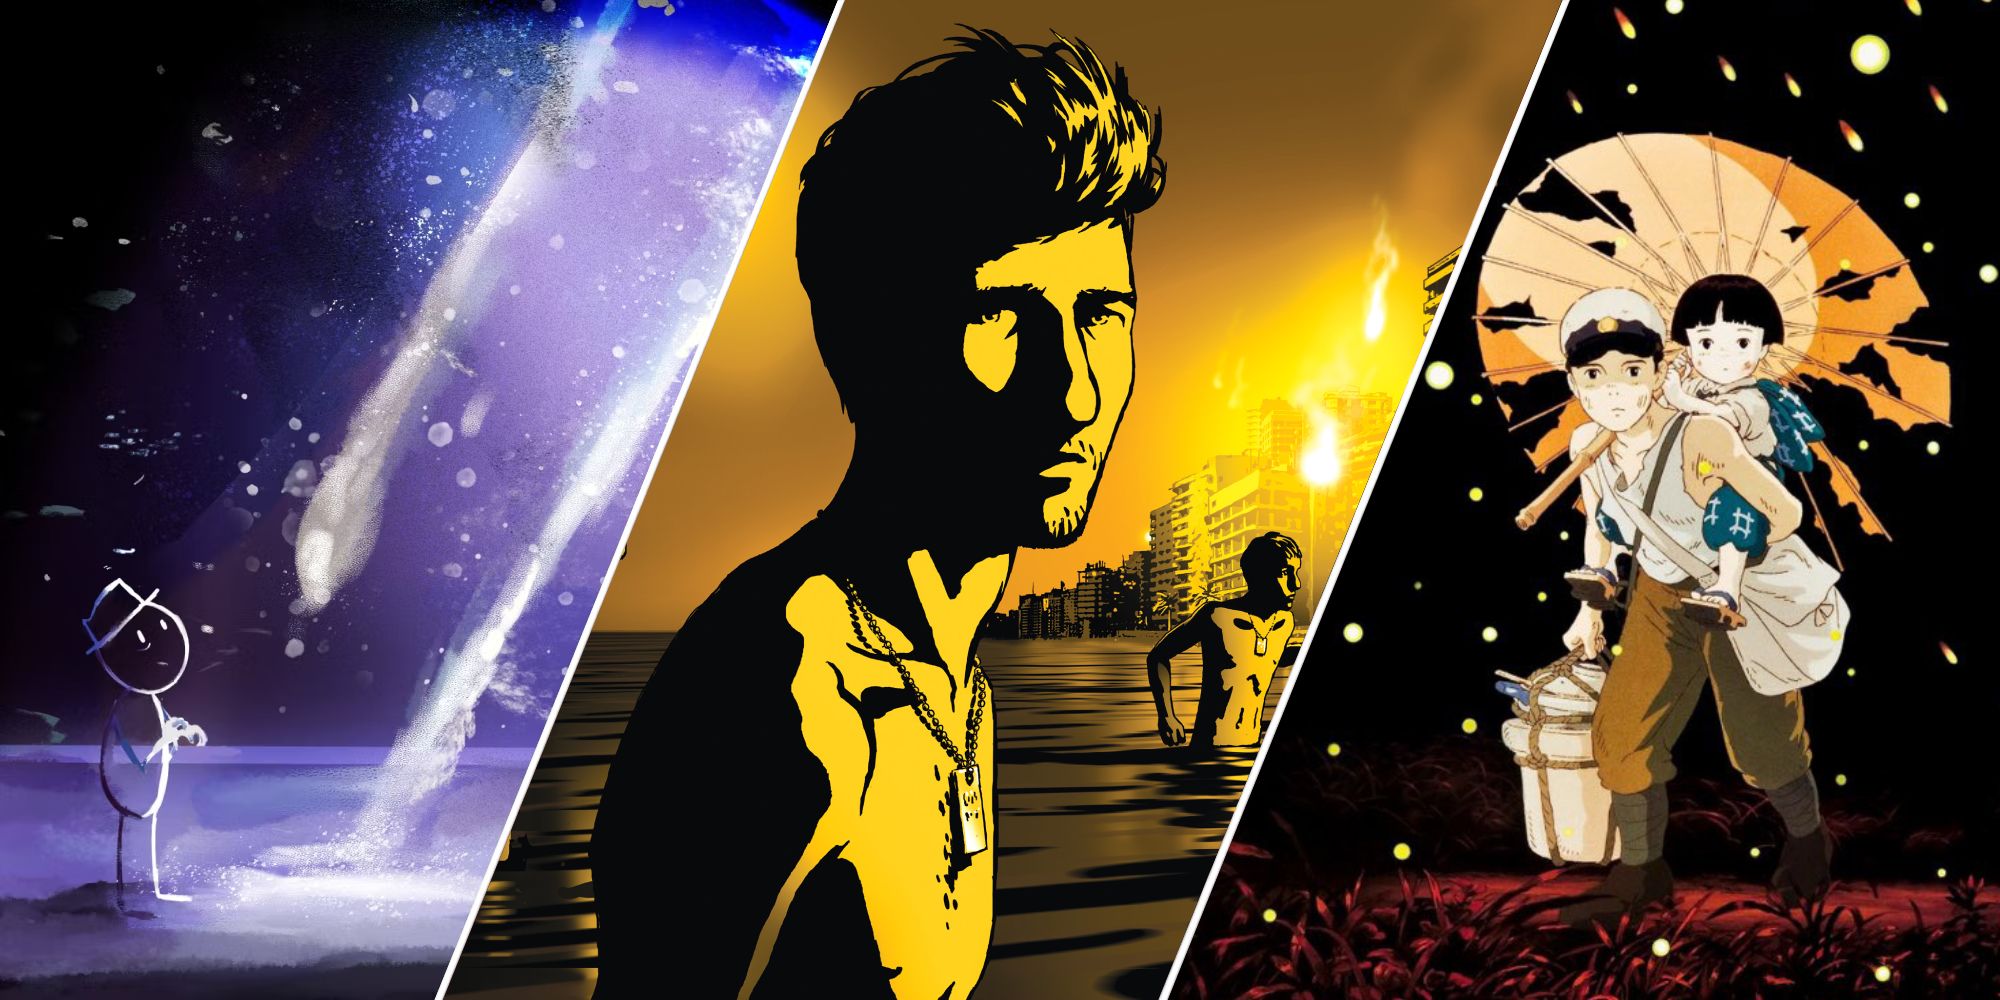 Stills from It's Such a Beautiful Day, Waltz With Bashir, and Grave of the Fireflies